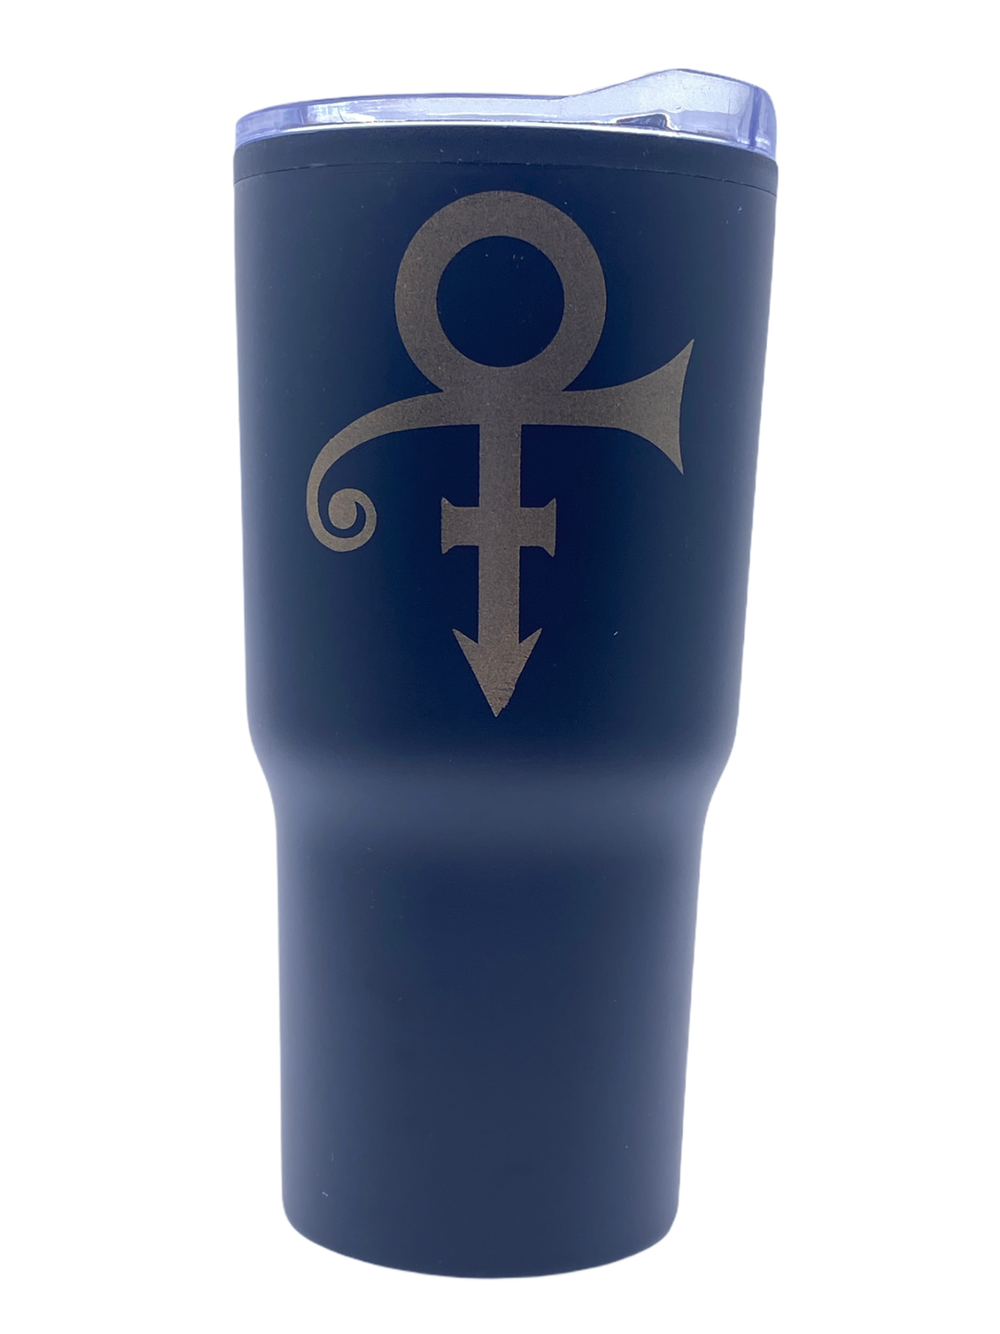 Prince – Official Travel Mug Drinks Tumbler Black With Gold Love Symbol Brand New